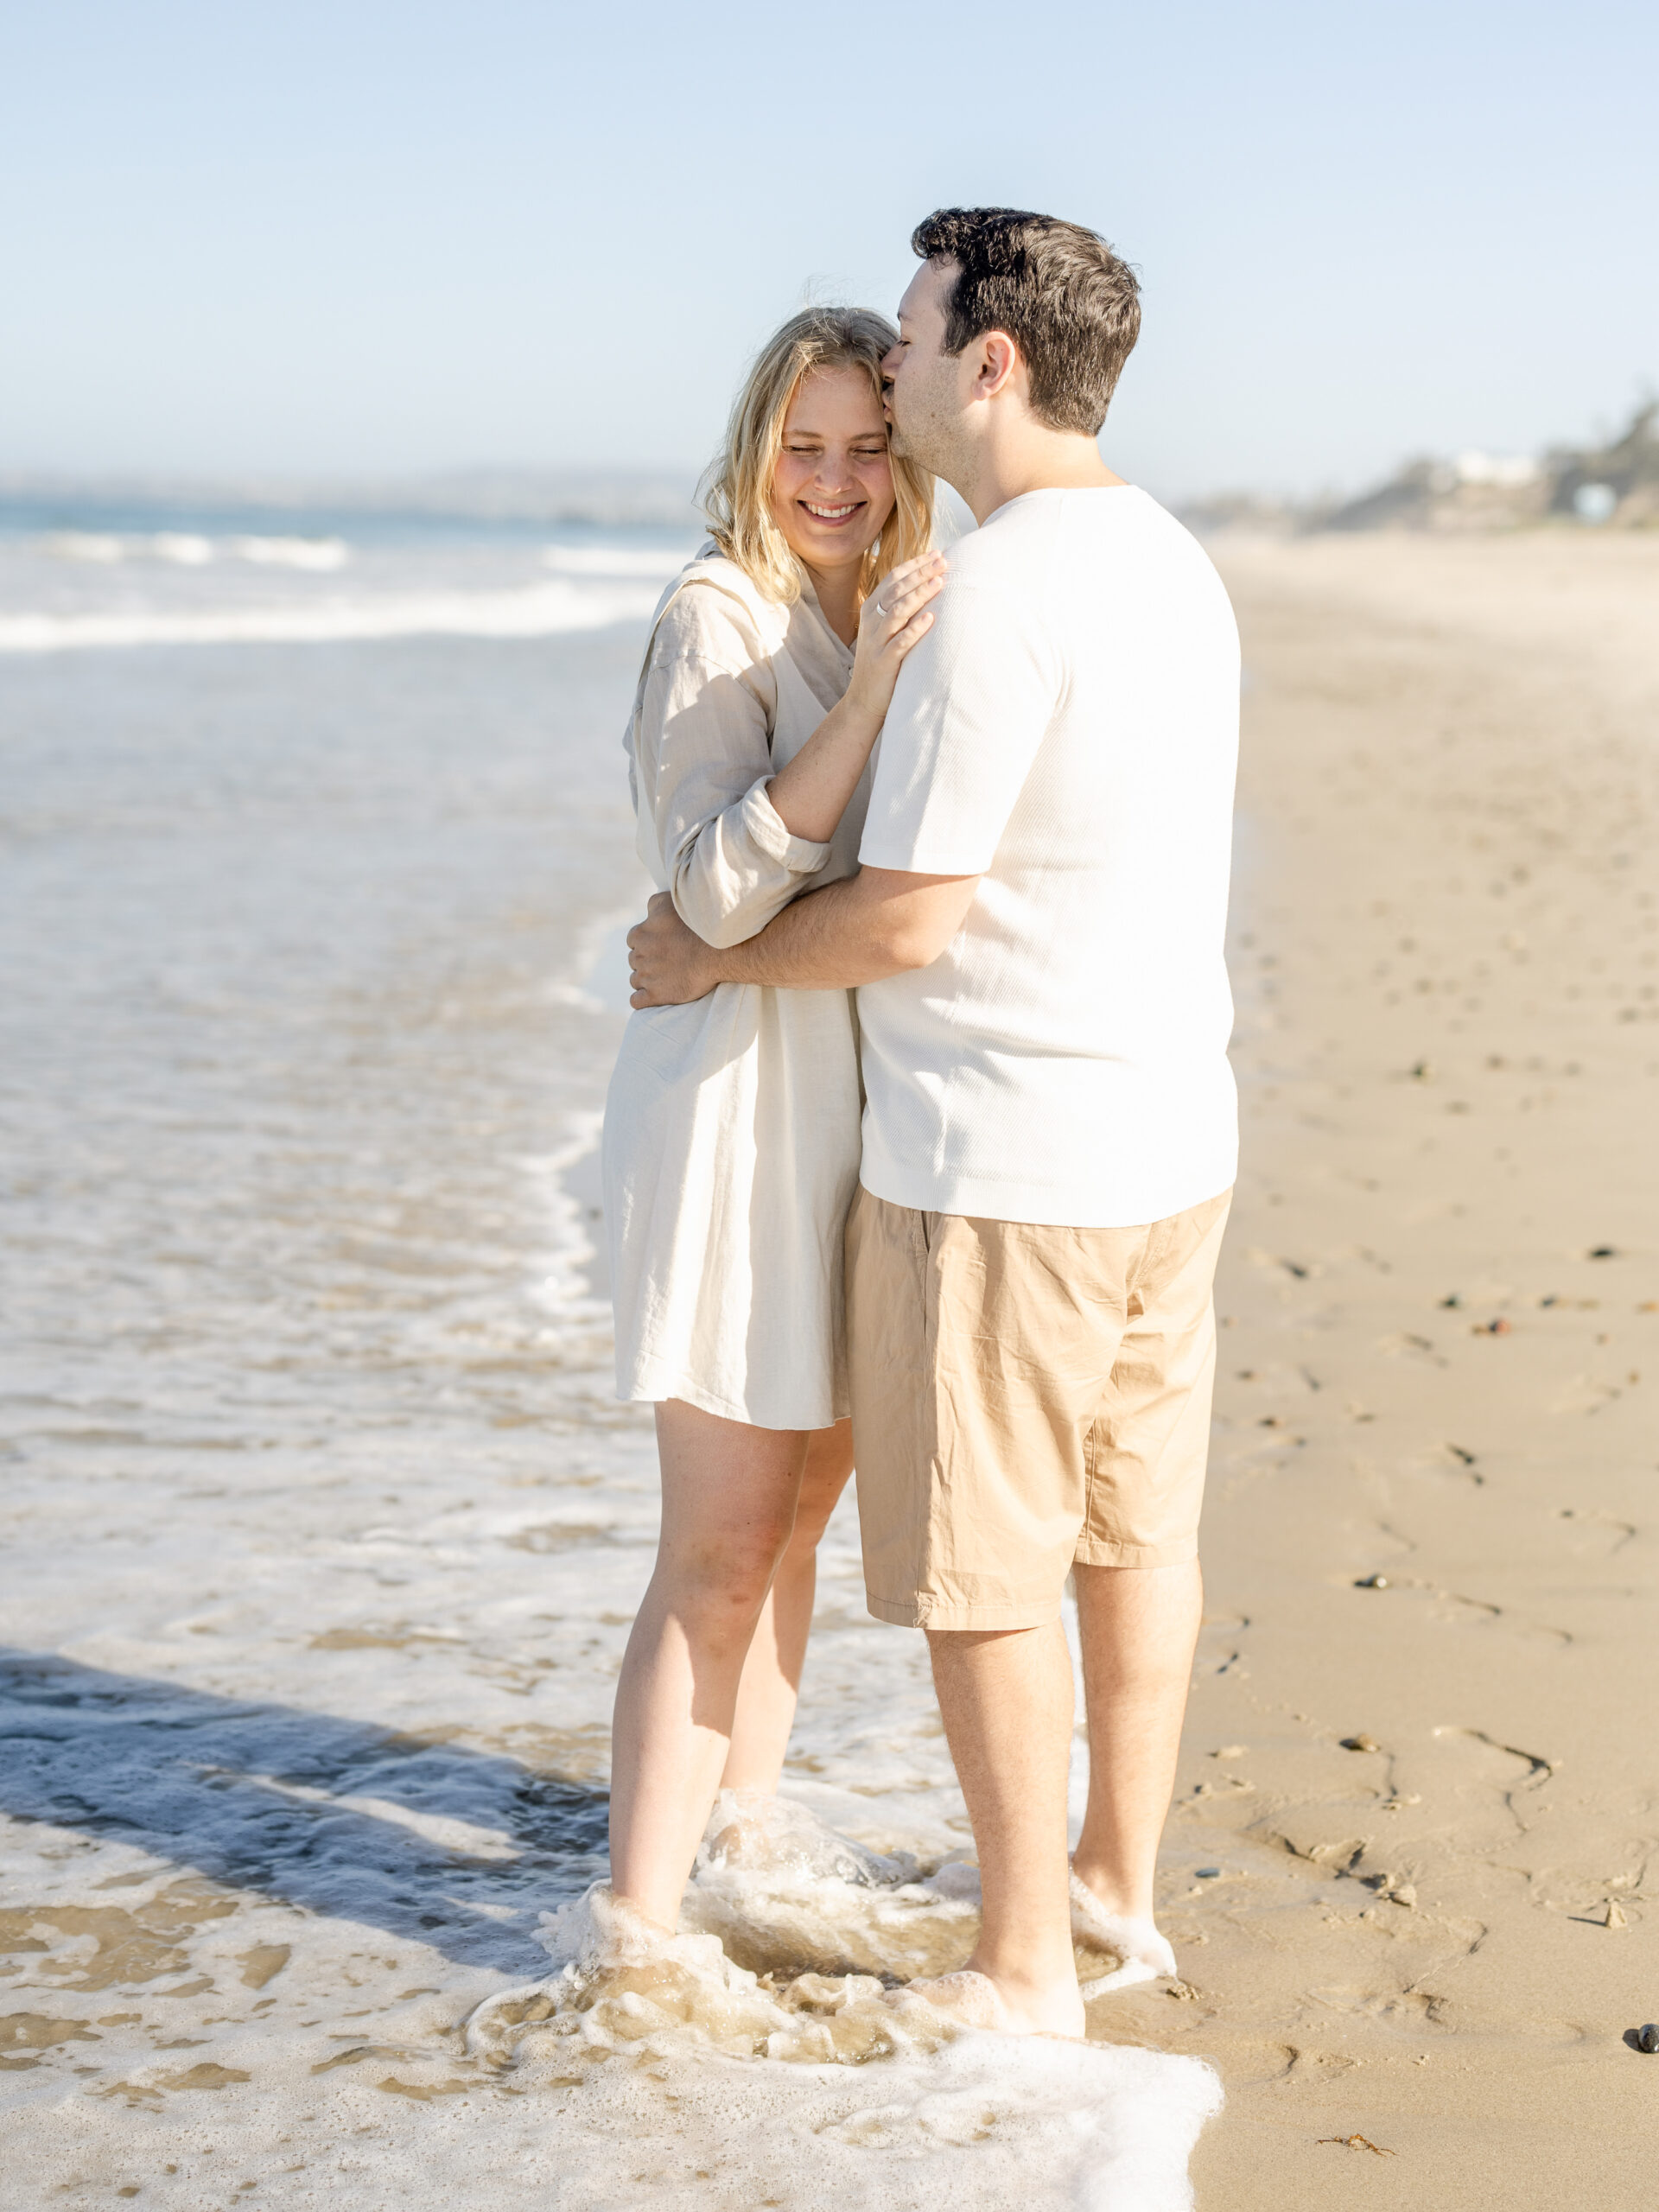 Morning engagement Session in San Clemente